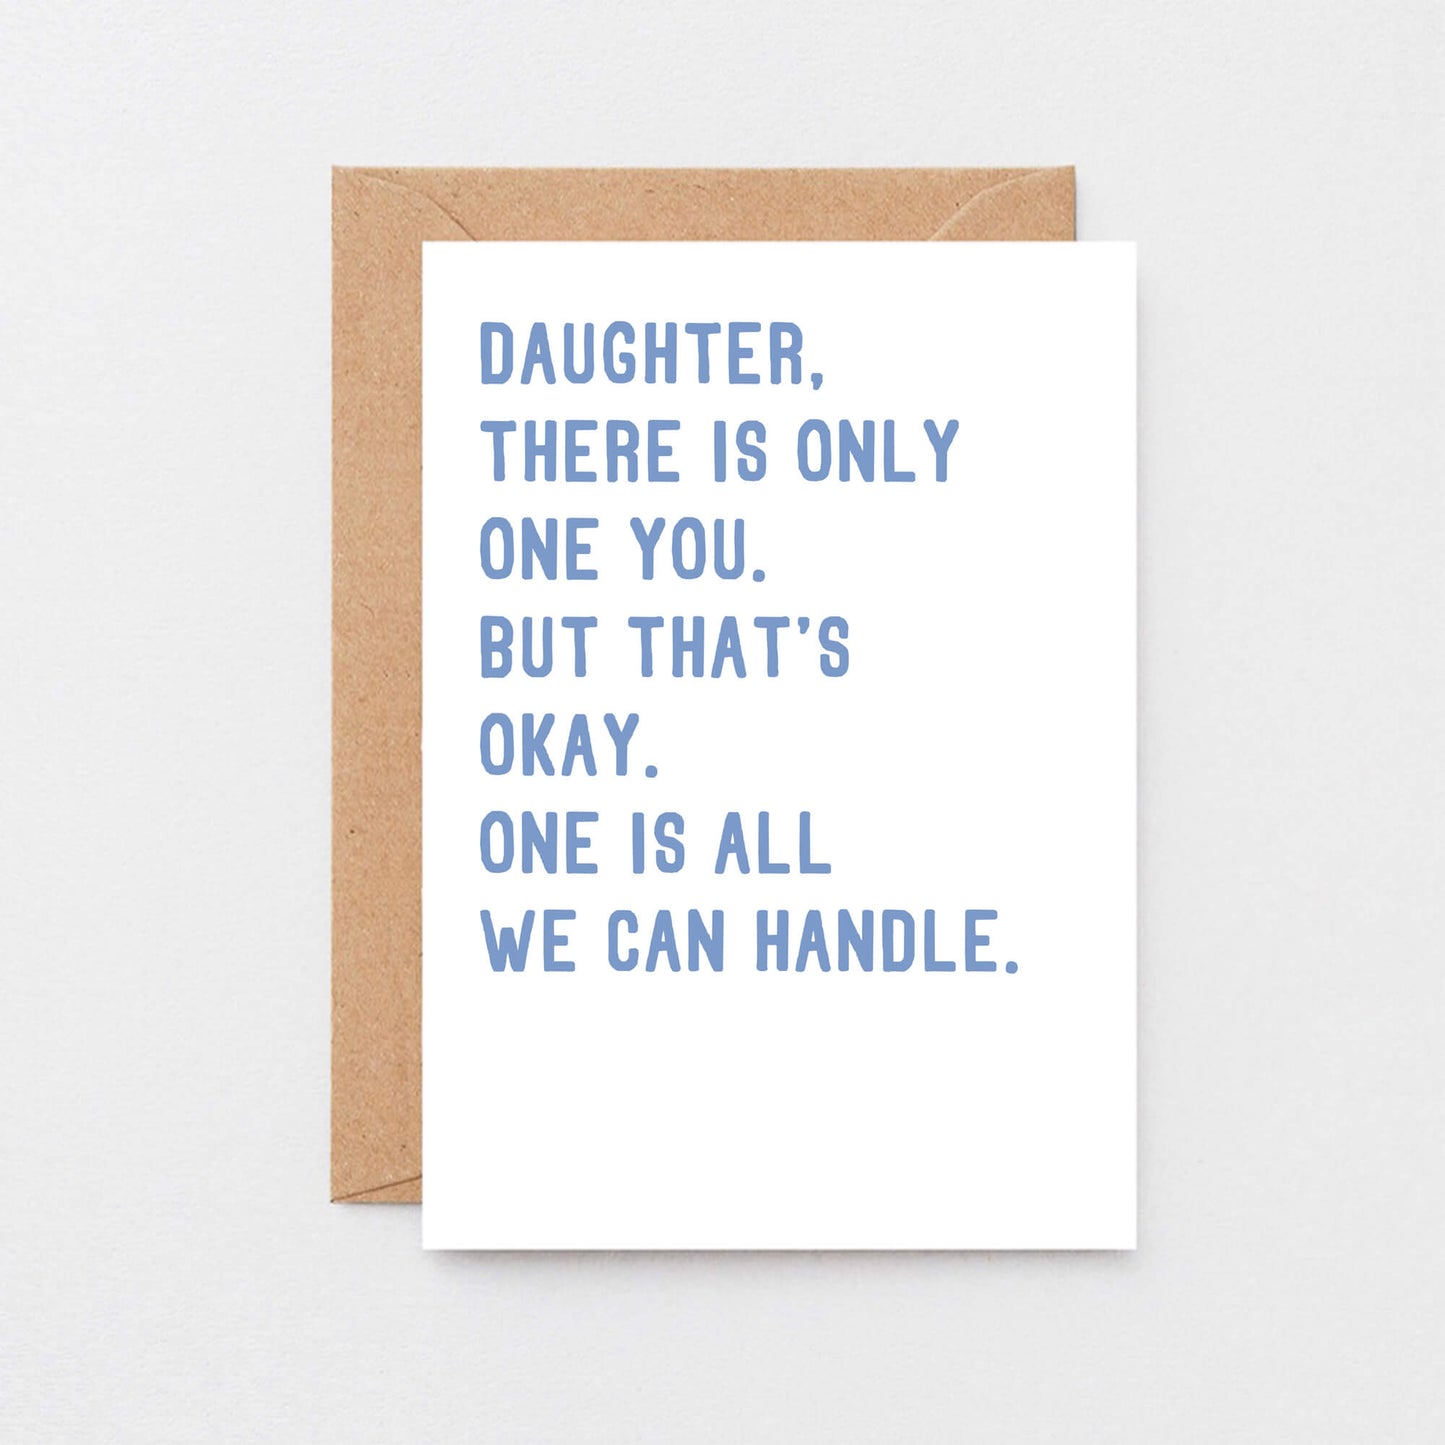 Daughter Card by SixElevenCreations. Reads Daughter, there is only one you. But that's okay. One is all we can handle. Product Code SE2024A6